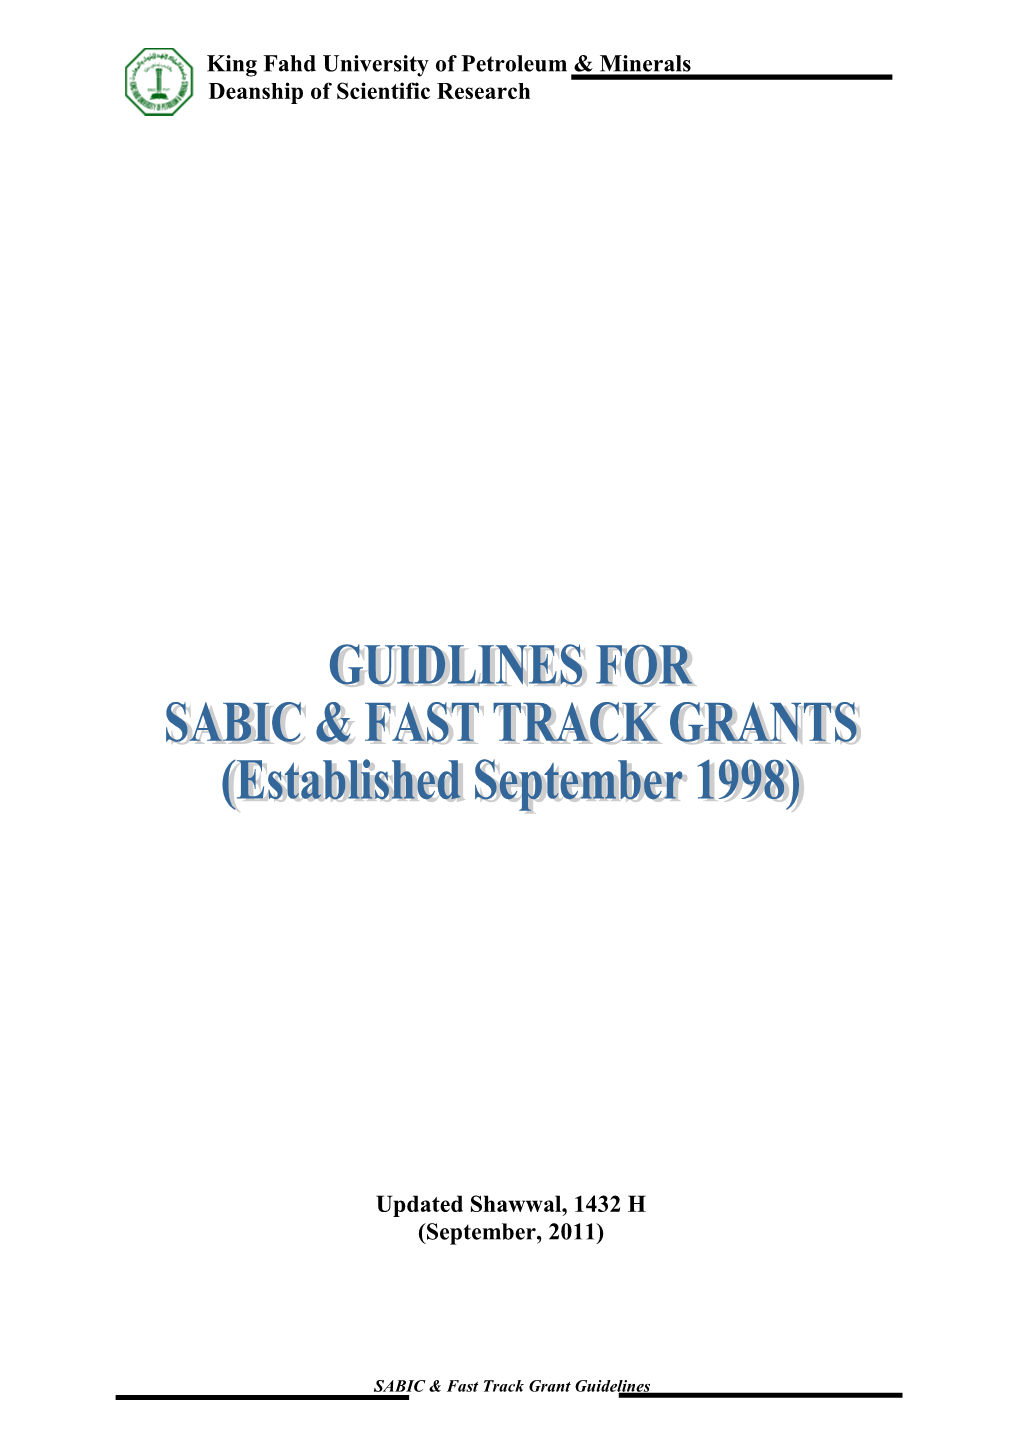 SABIC Fast Track Research Guidlines